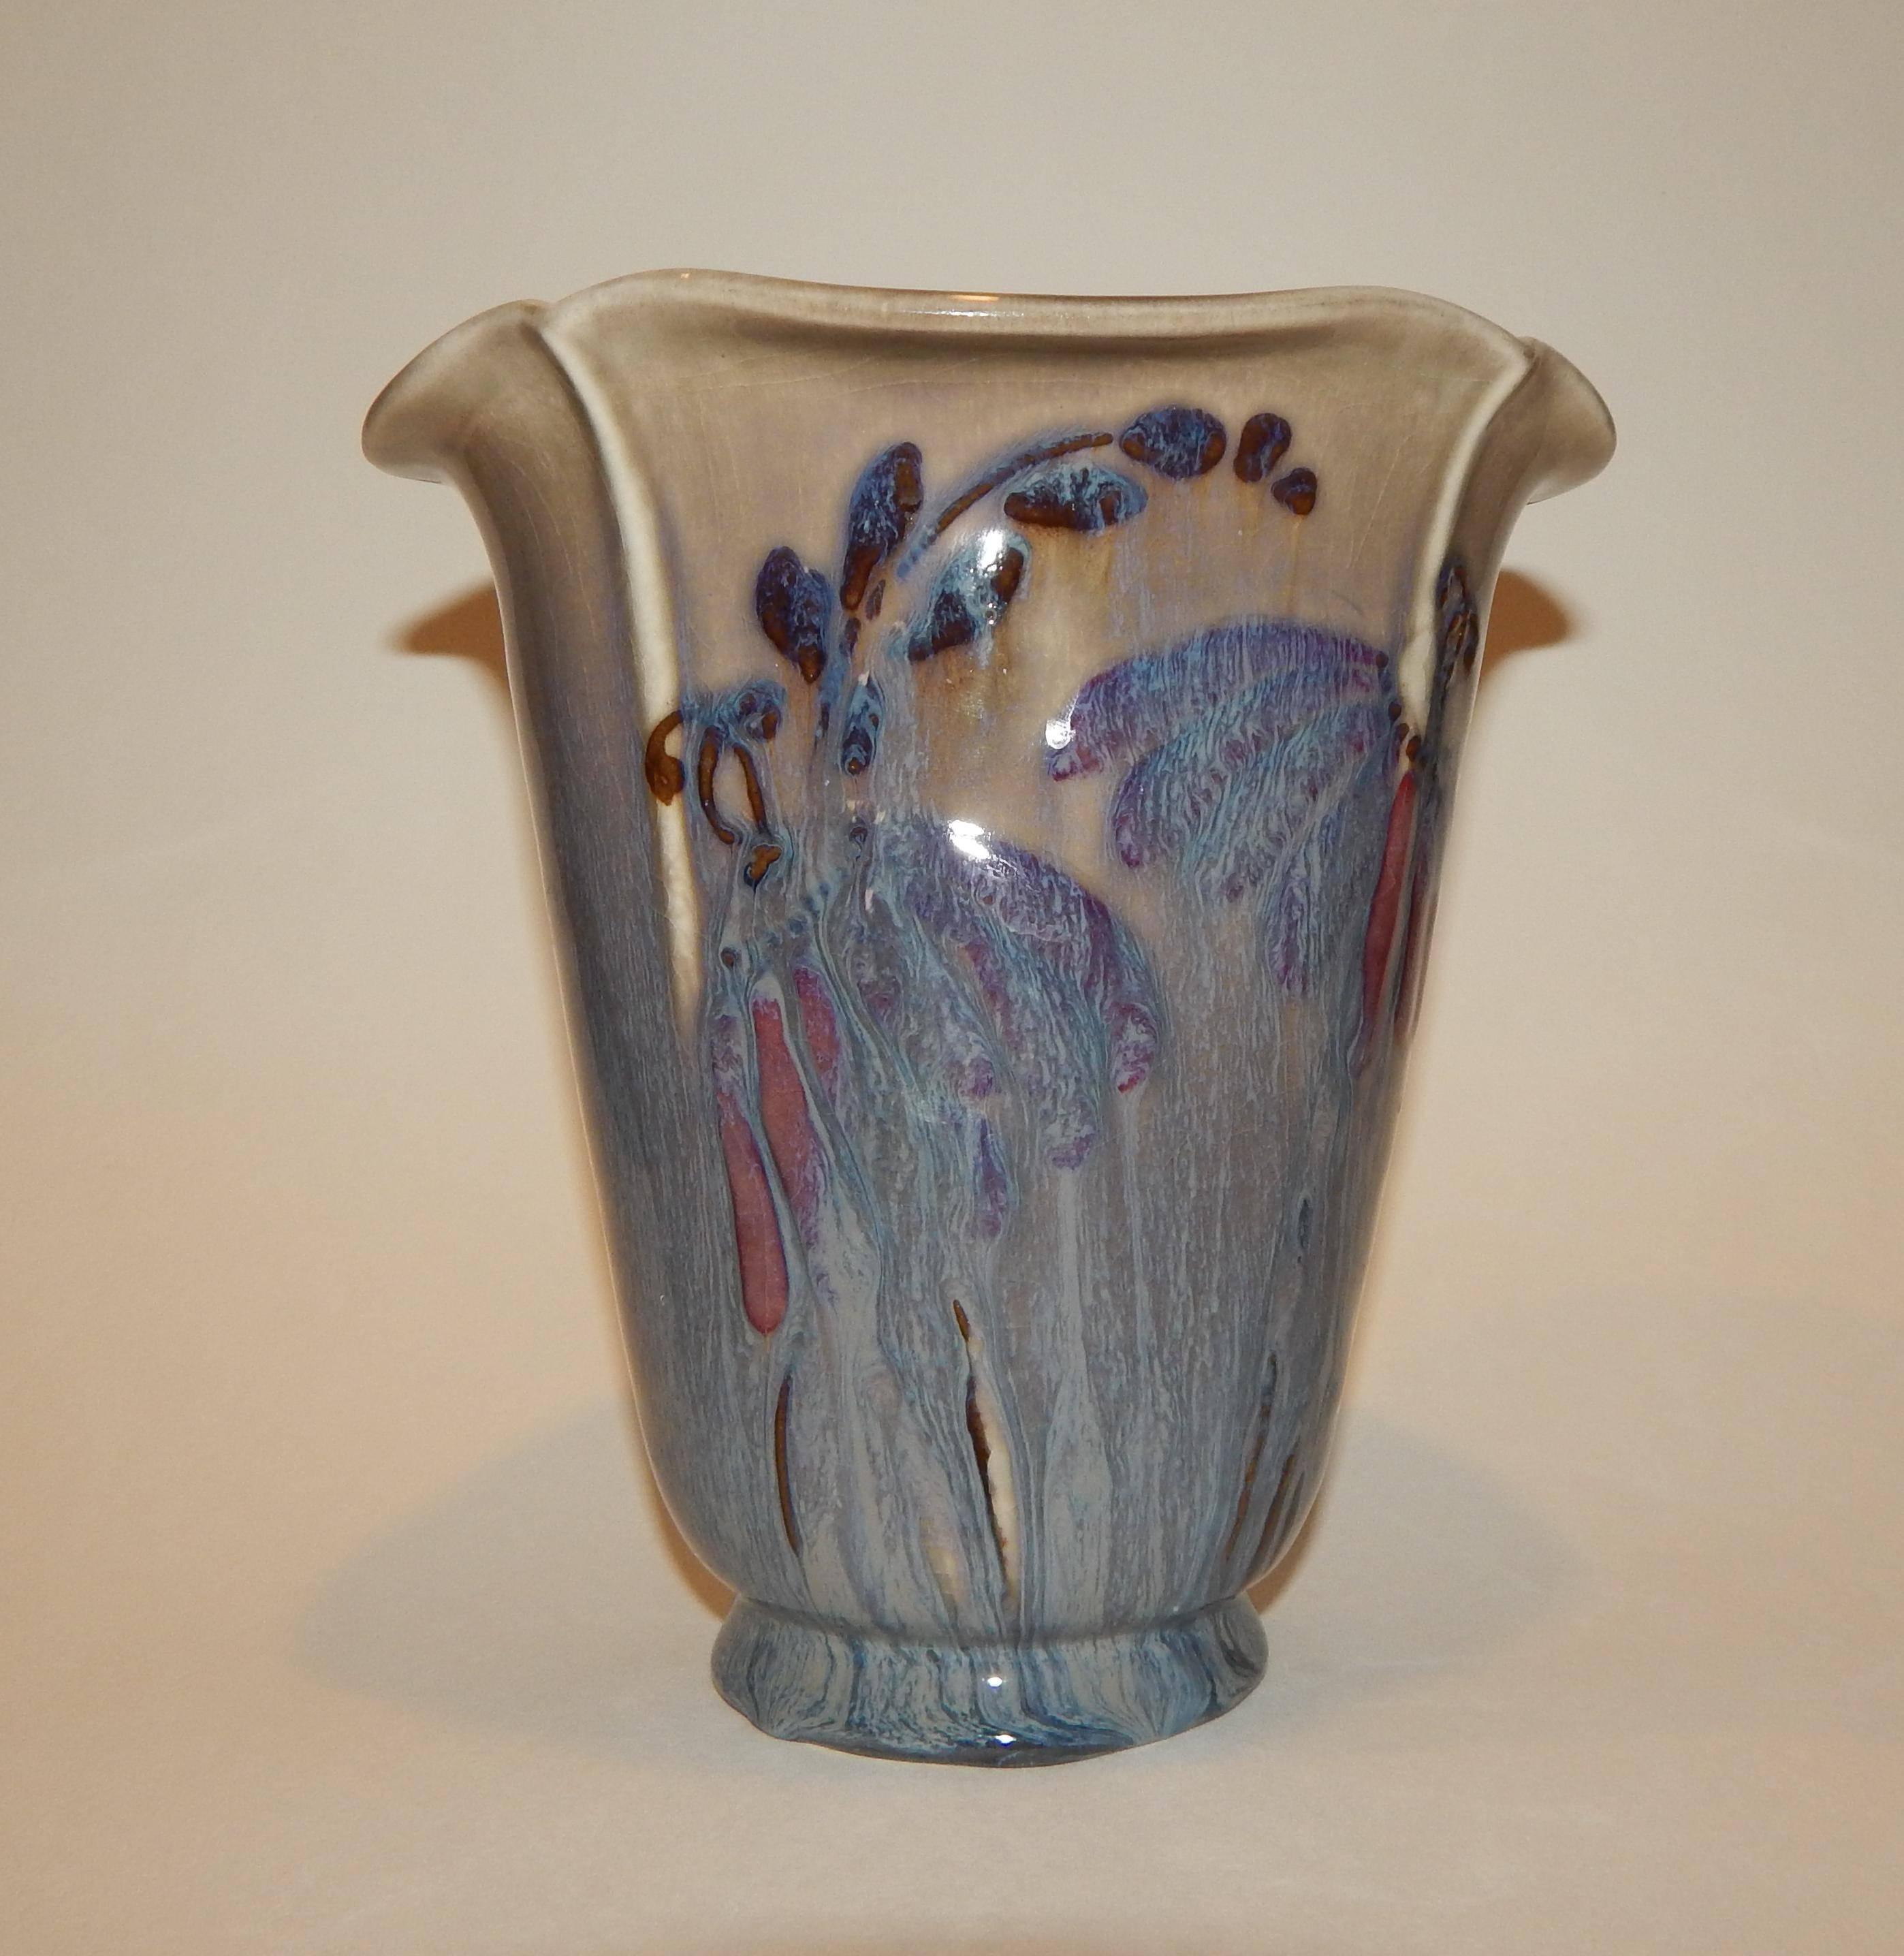 Beautiful flare top Rookwood Pottery vase, 1946.
In excellent condition.
Measures: 7 1/8